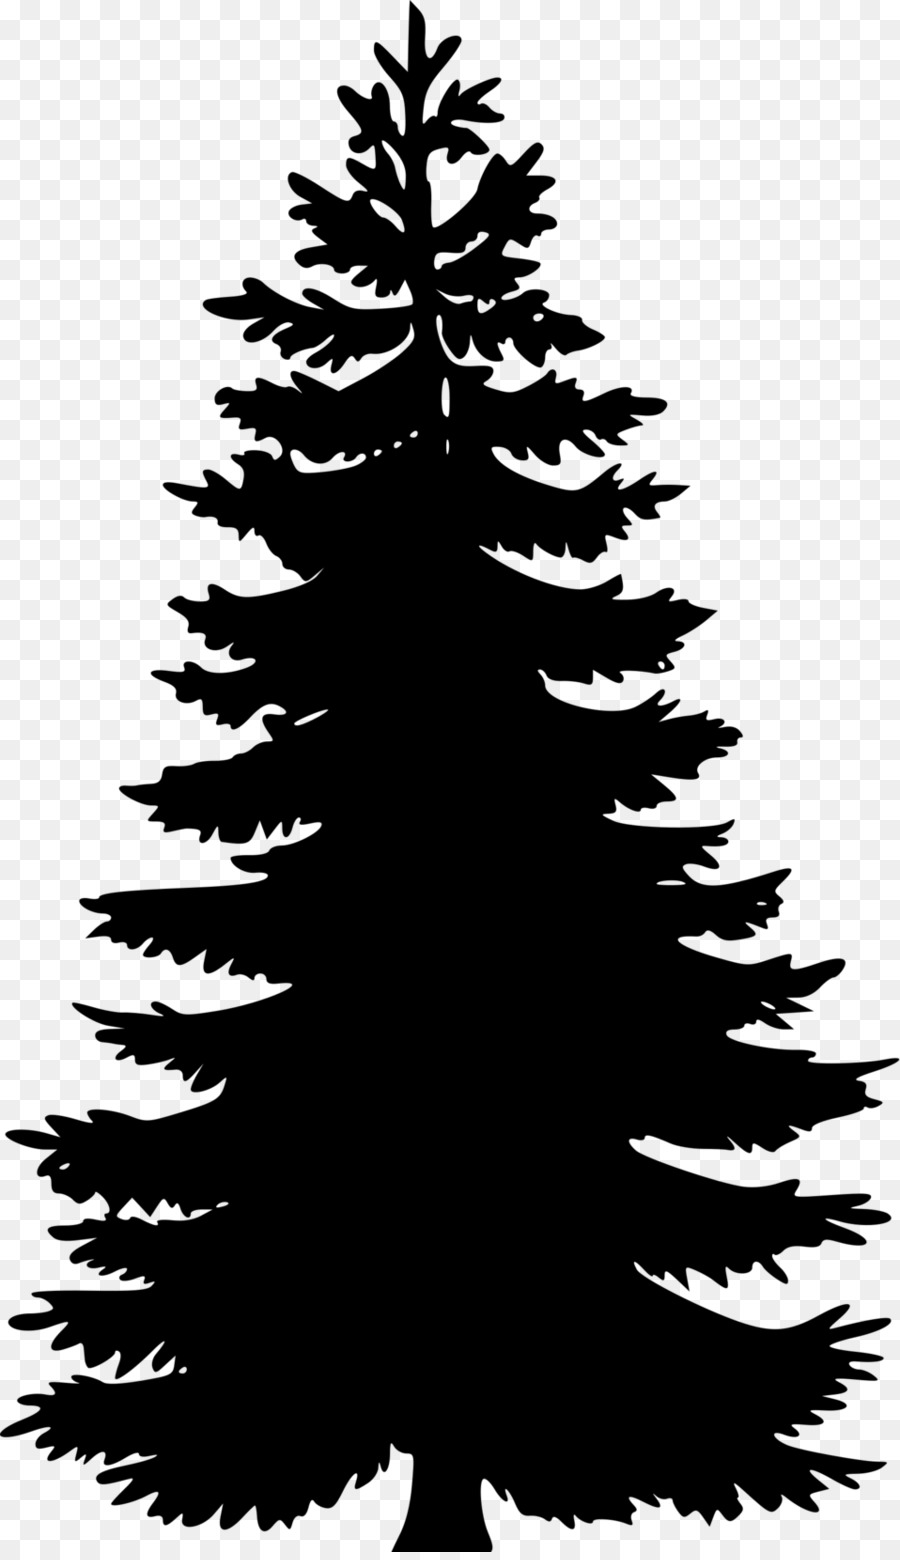 Eastern white pine Tree Clip art - tree png download - 958*1652 - Free Transparent Pine png Download.